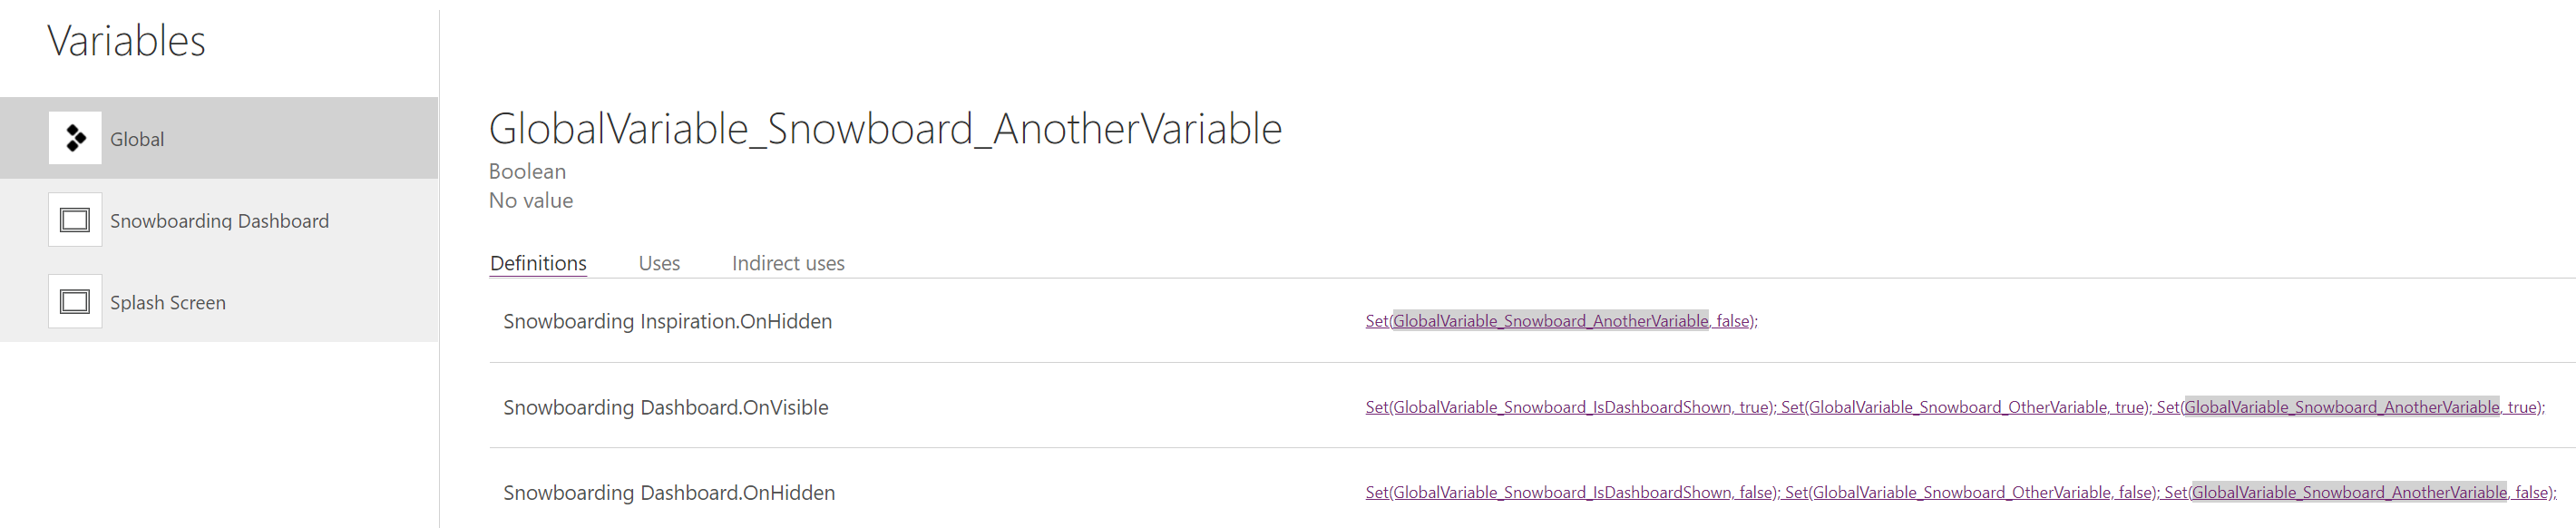 Selecting a global variable takes you to the backstage of the selected global variables.